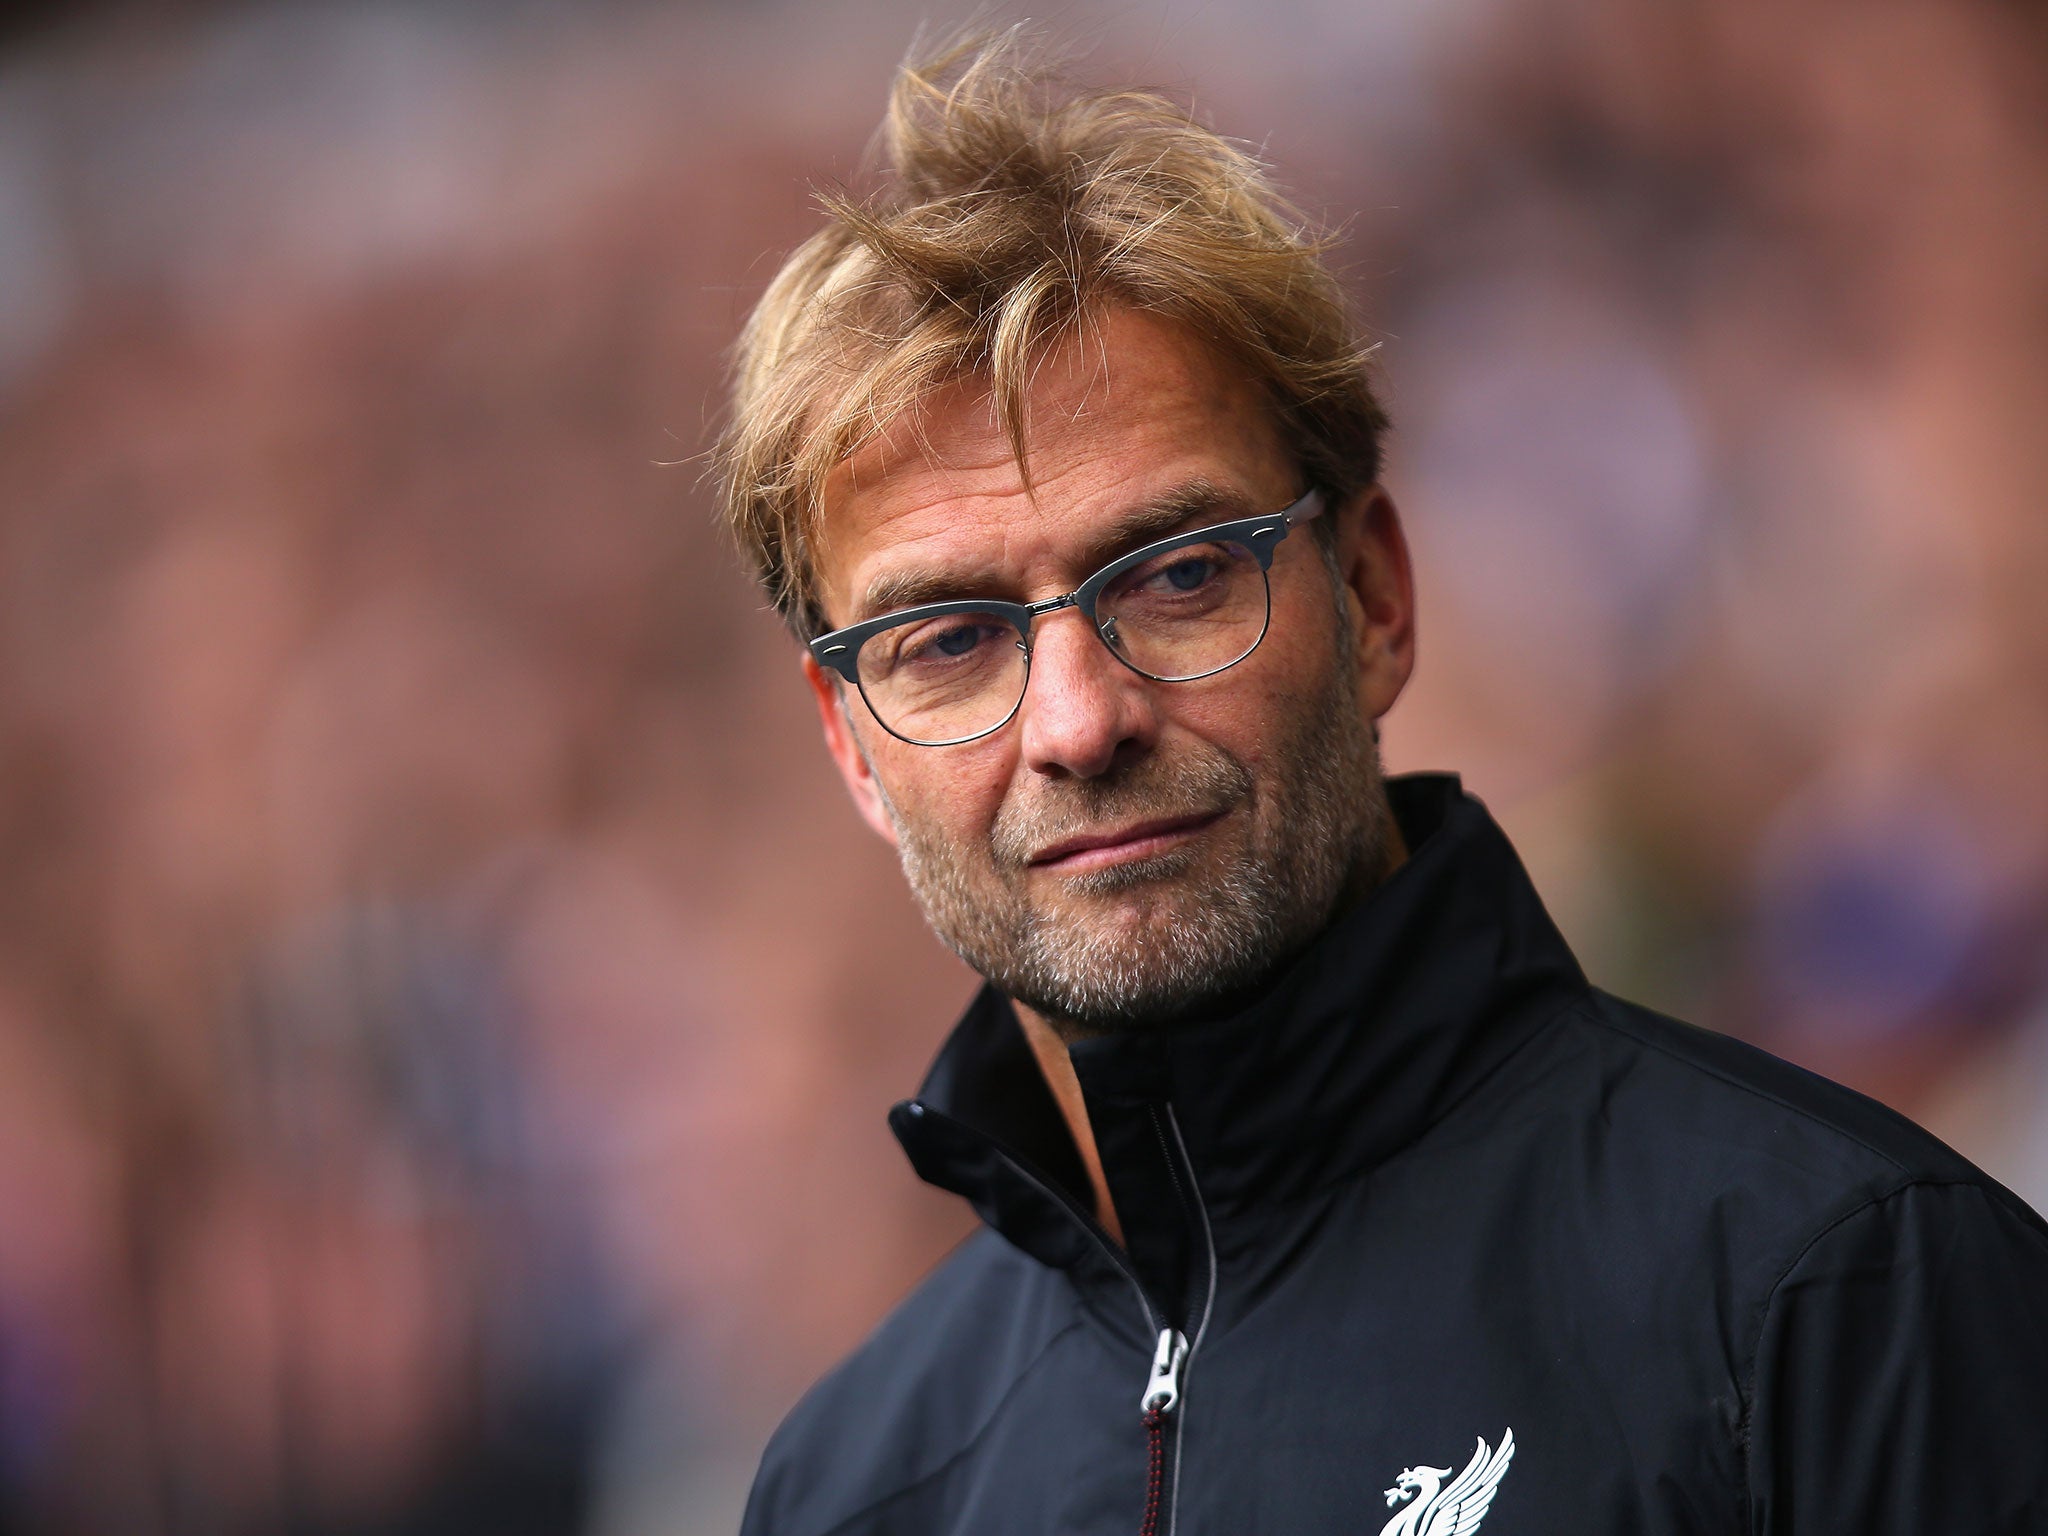 Jurgen Klopp opens up on why he was first drawn to Liverpool as a manager